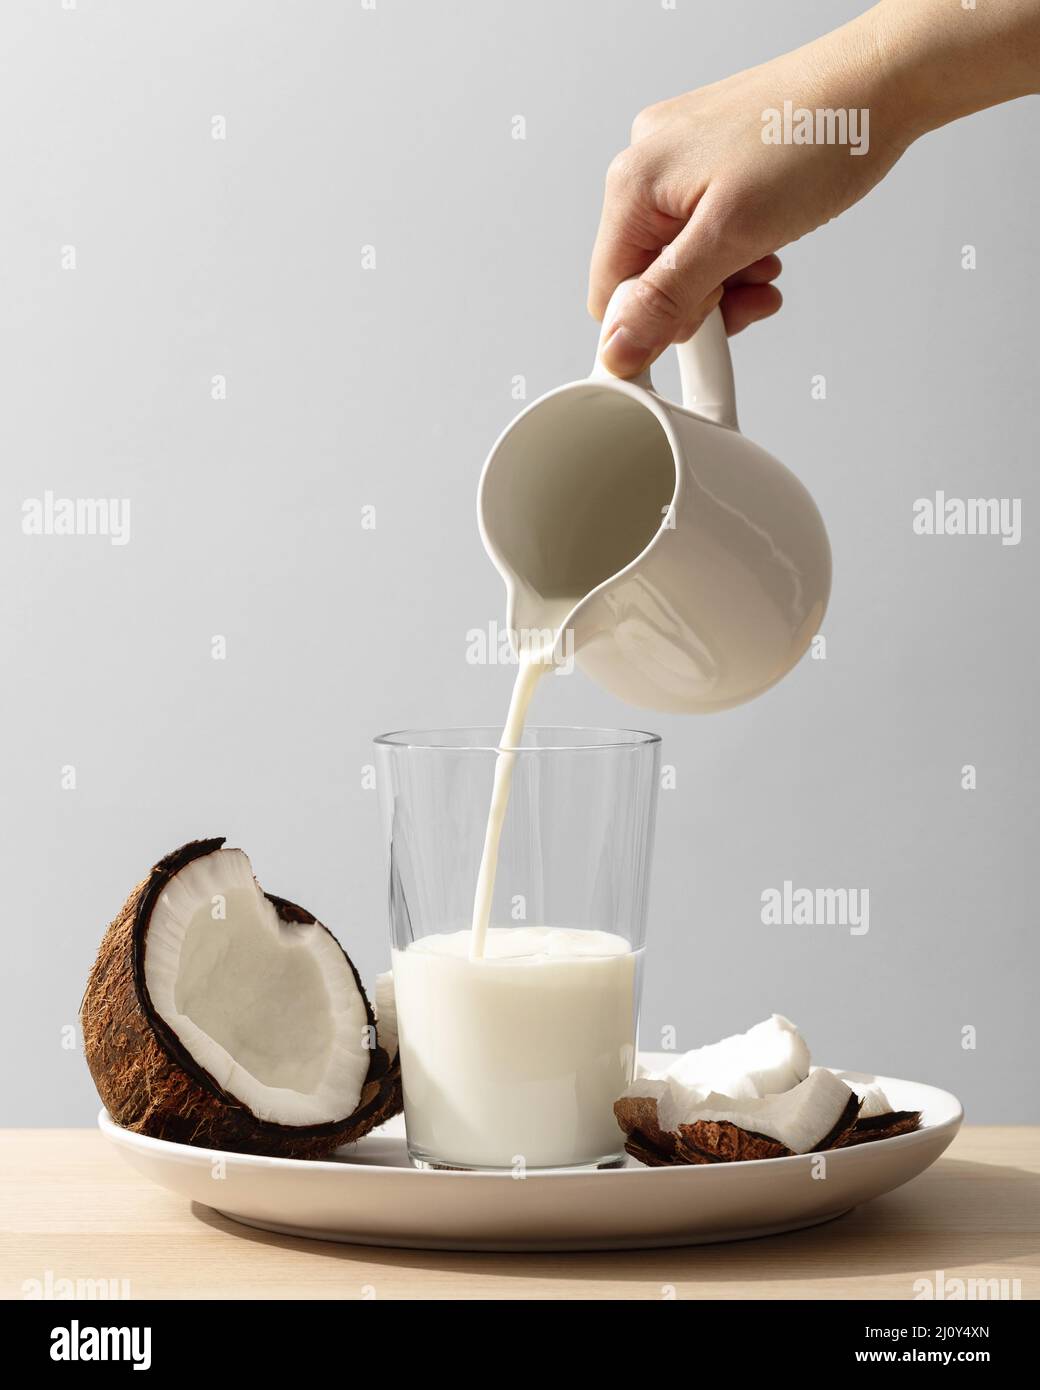 Front view hand pouring coconut milk glass. High quality photo Stock Photo